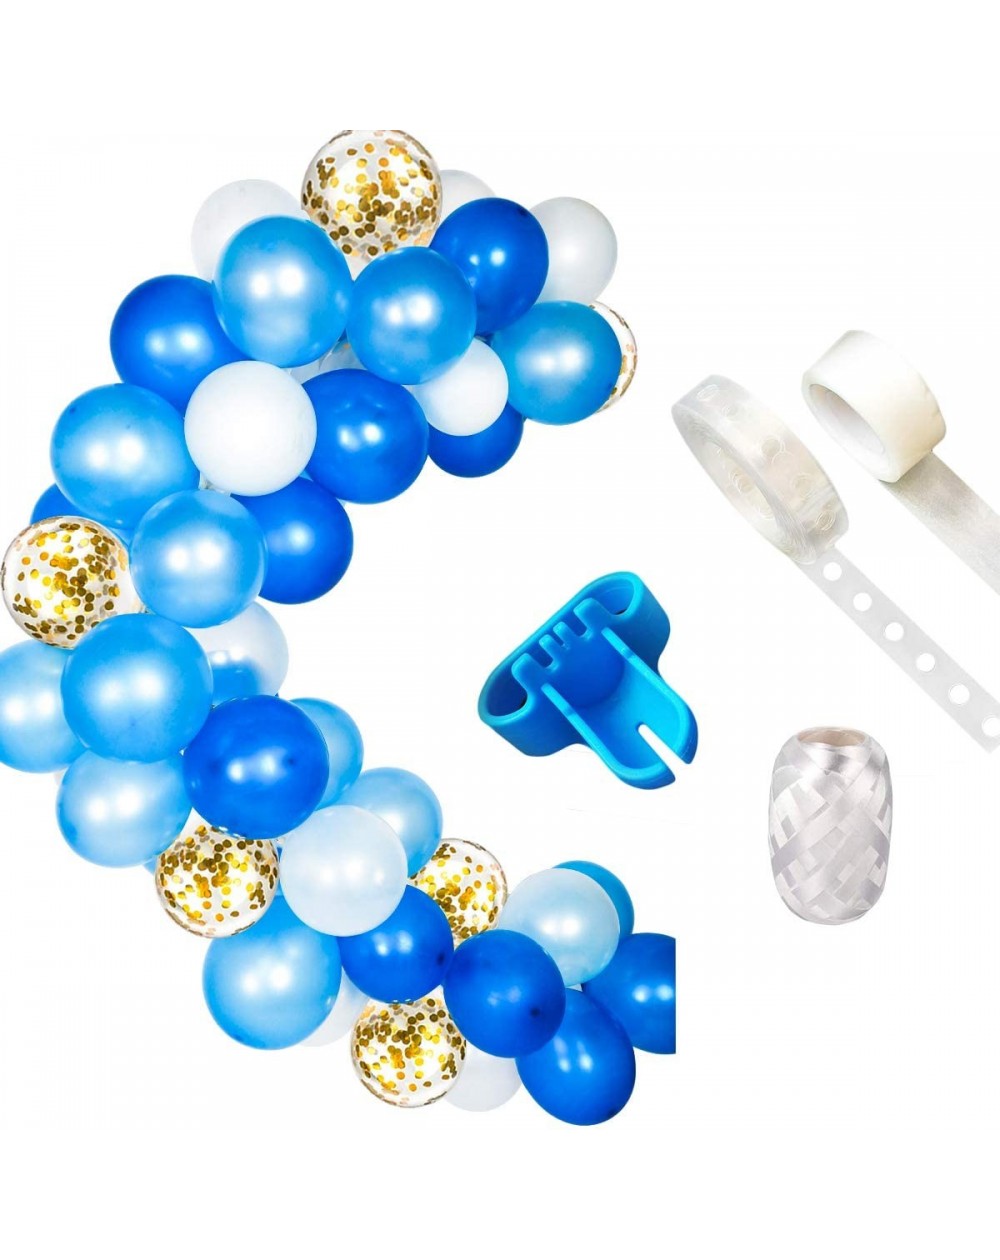 Balloons Balloon Garland Kit Balloon Arch Garland- Blue and White Balloon Arch Garland Kit (Total 114pcs) for Blue and White ...